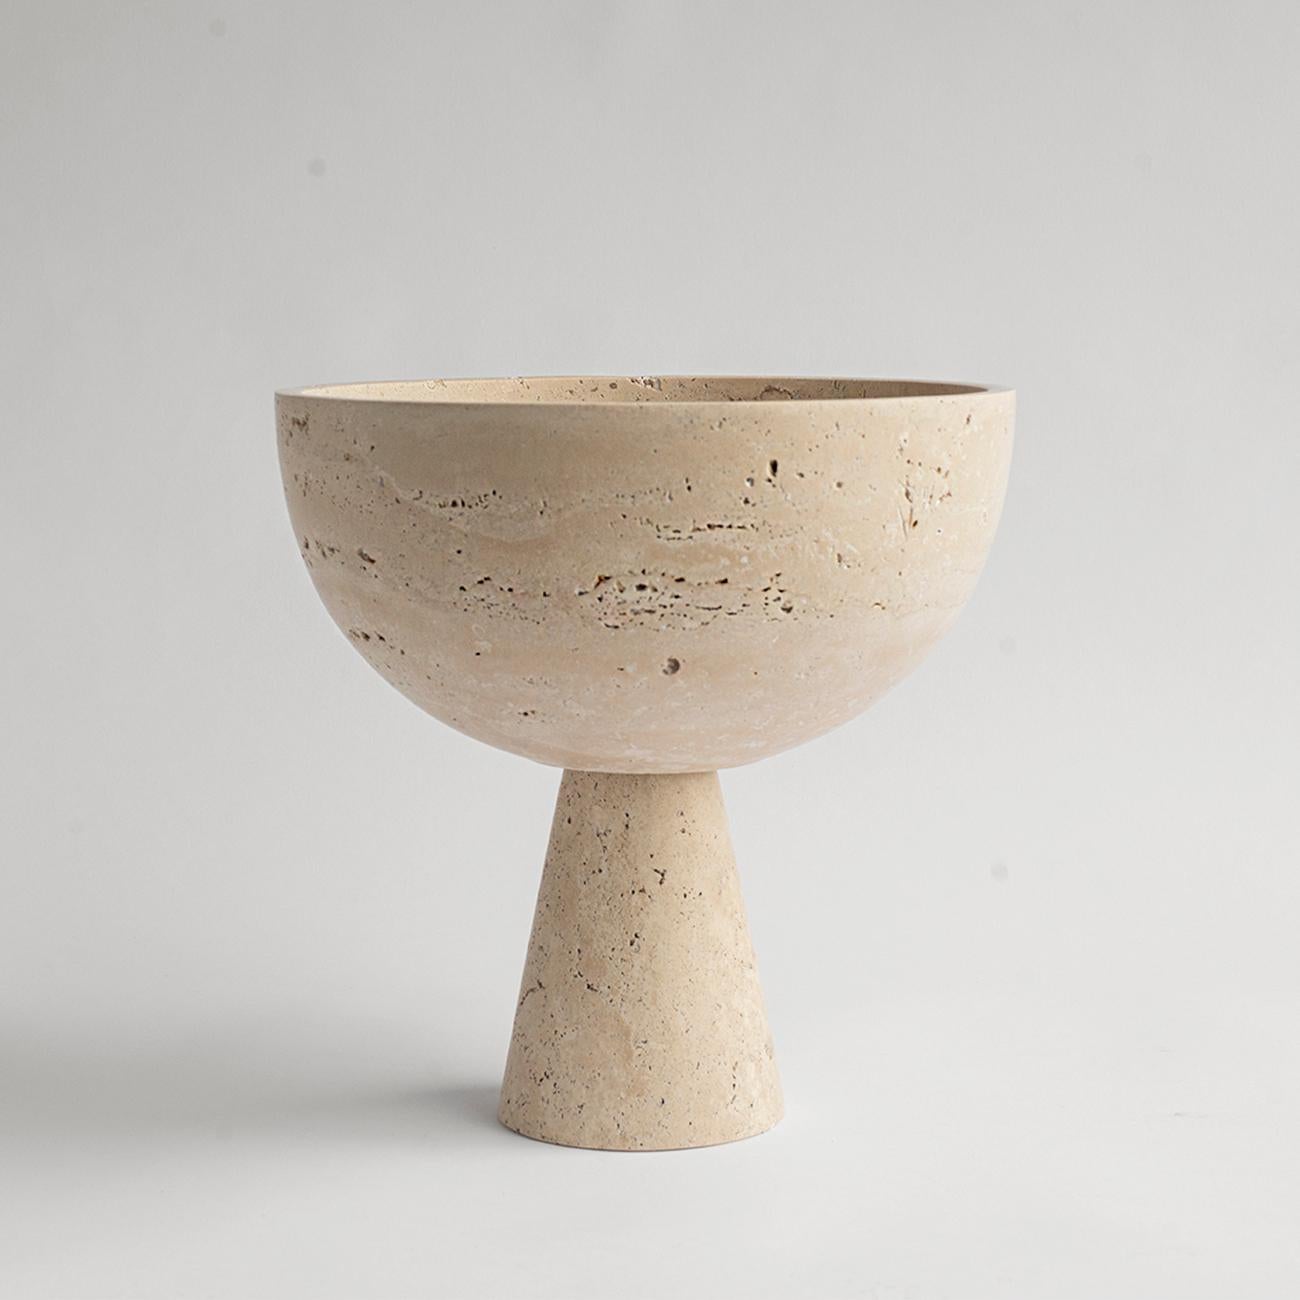 A substantial travertine bowl with unique structure rests atop a pedestal for a grand presentation of fruits and vegetables. 

Due to the nature of the material, each piece may vary slightly in appearance. We encourage embracing the variations